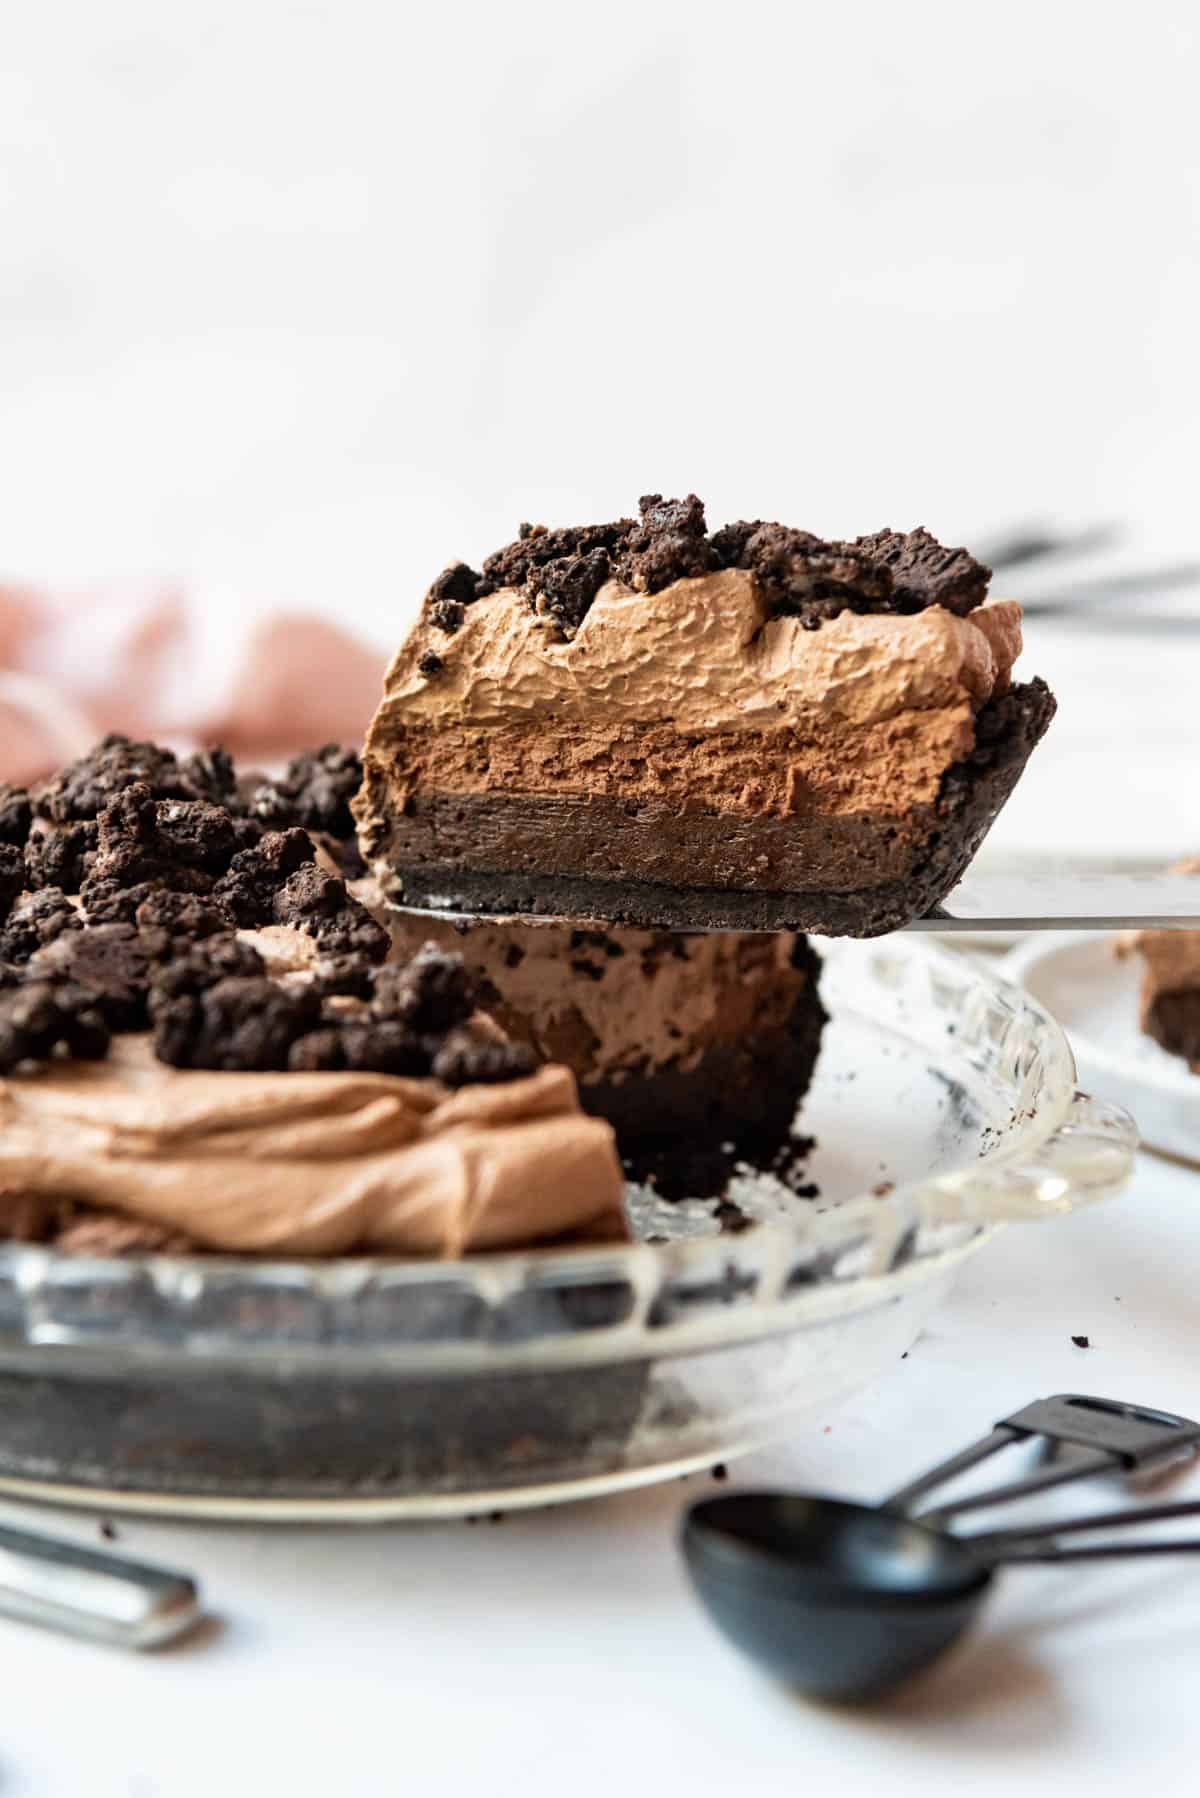 A slice of Mississippi mud pie being lifted out of a glass pie dish.